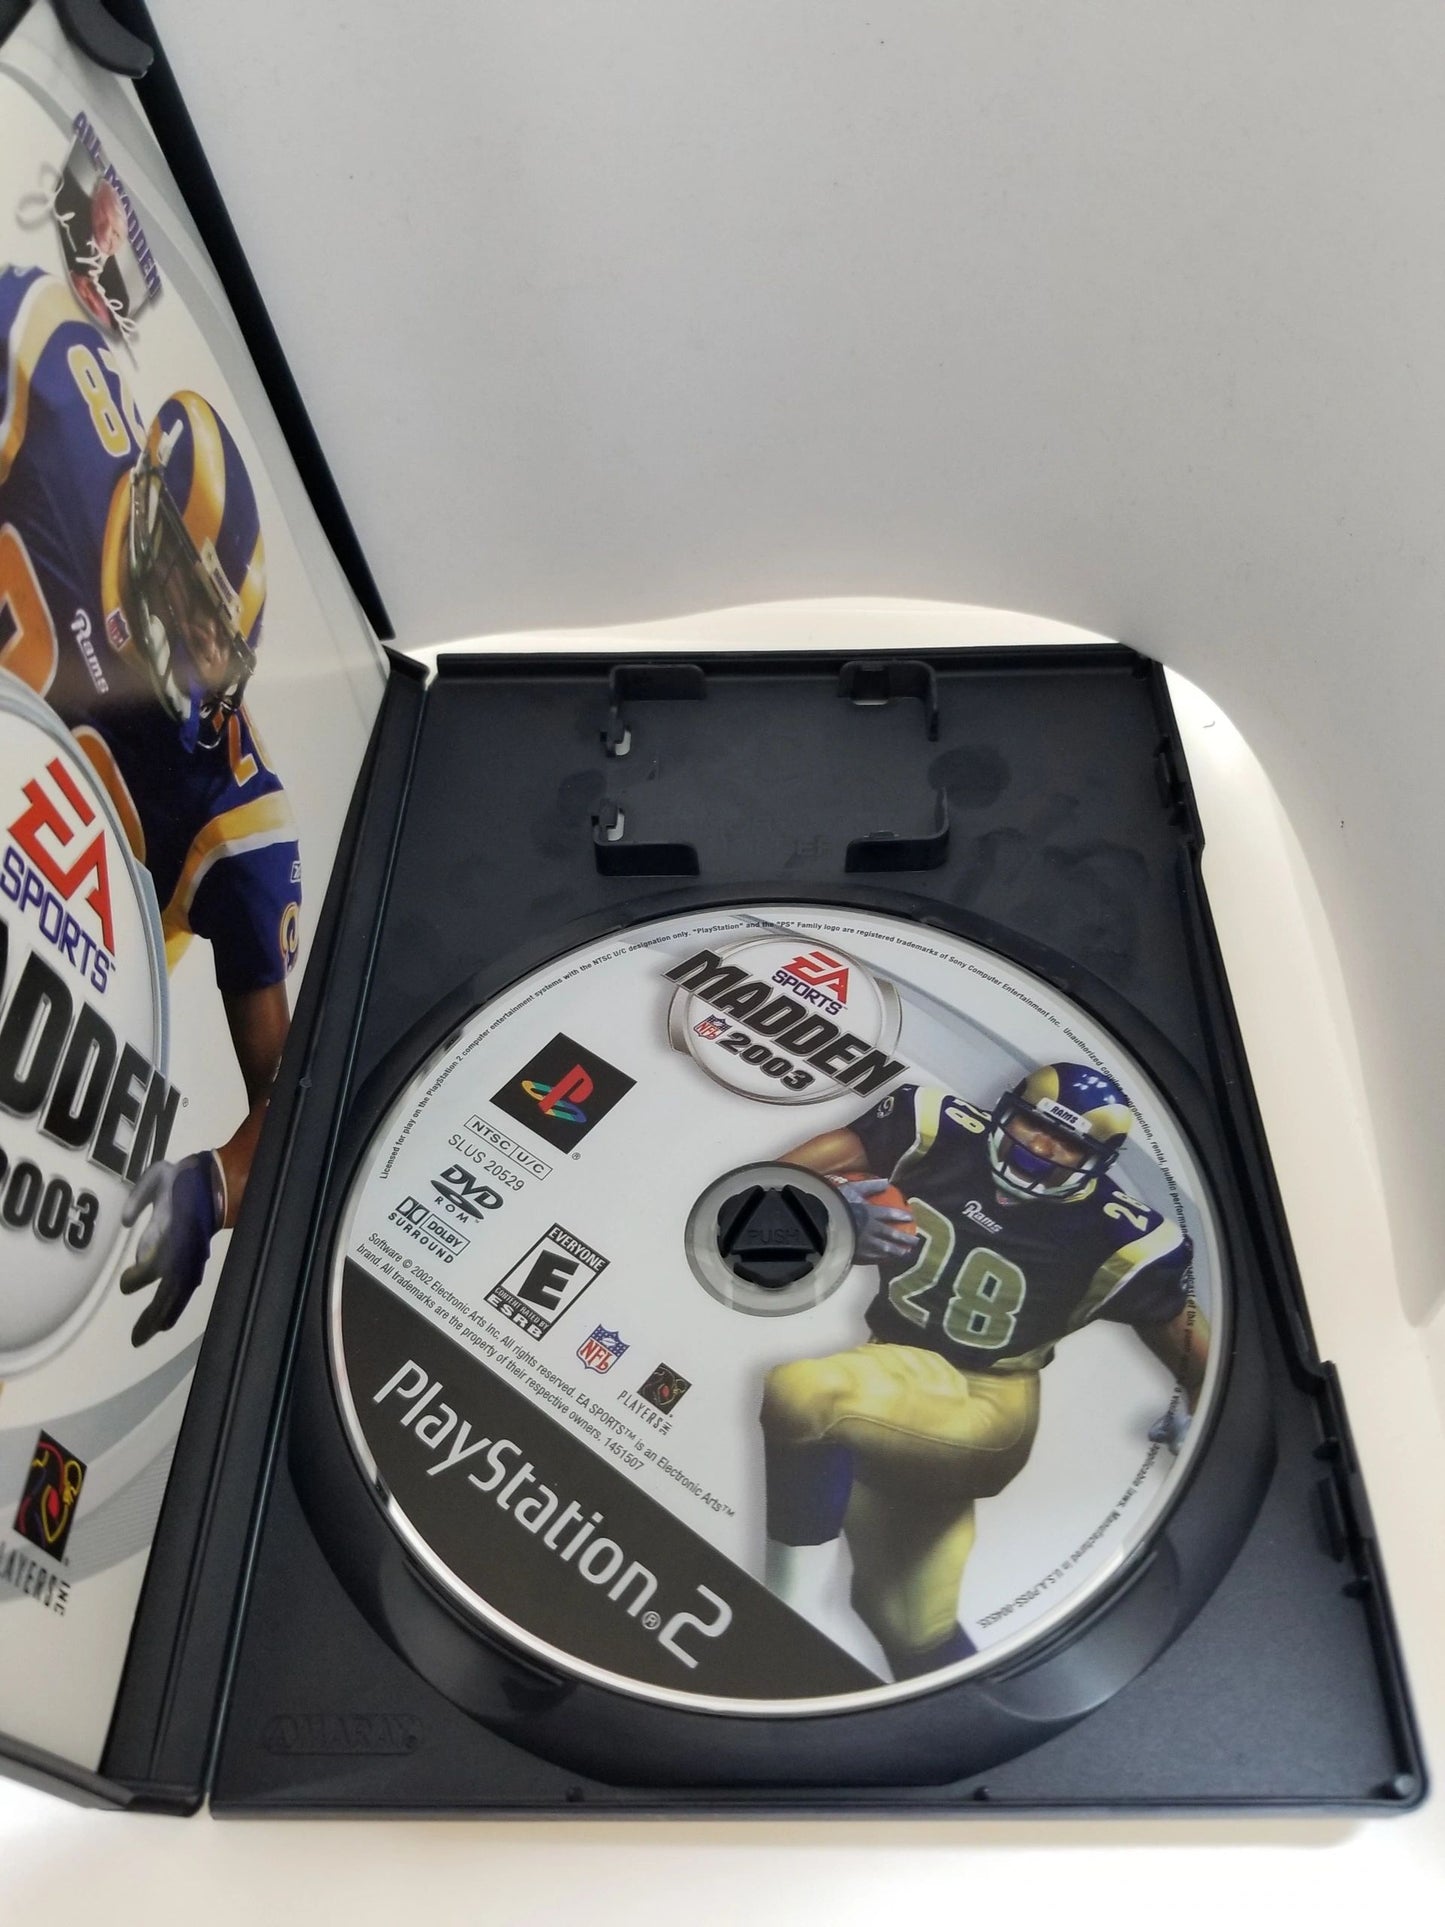 Preowned Madden 2003 (PS2)